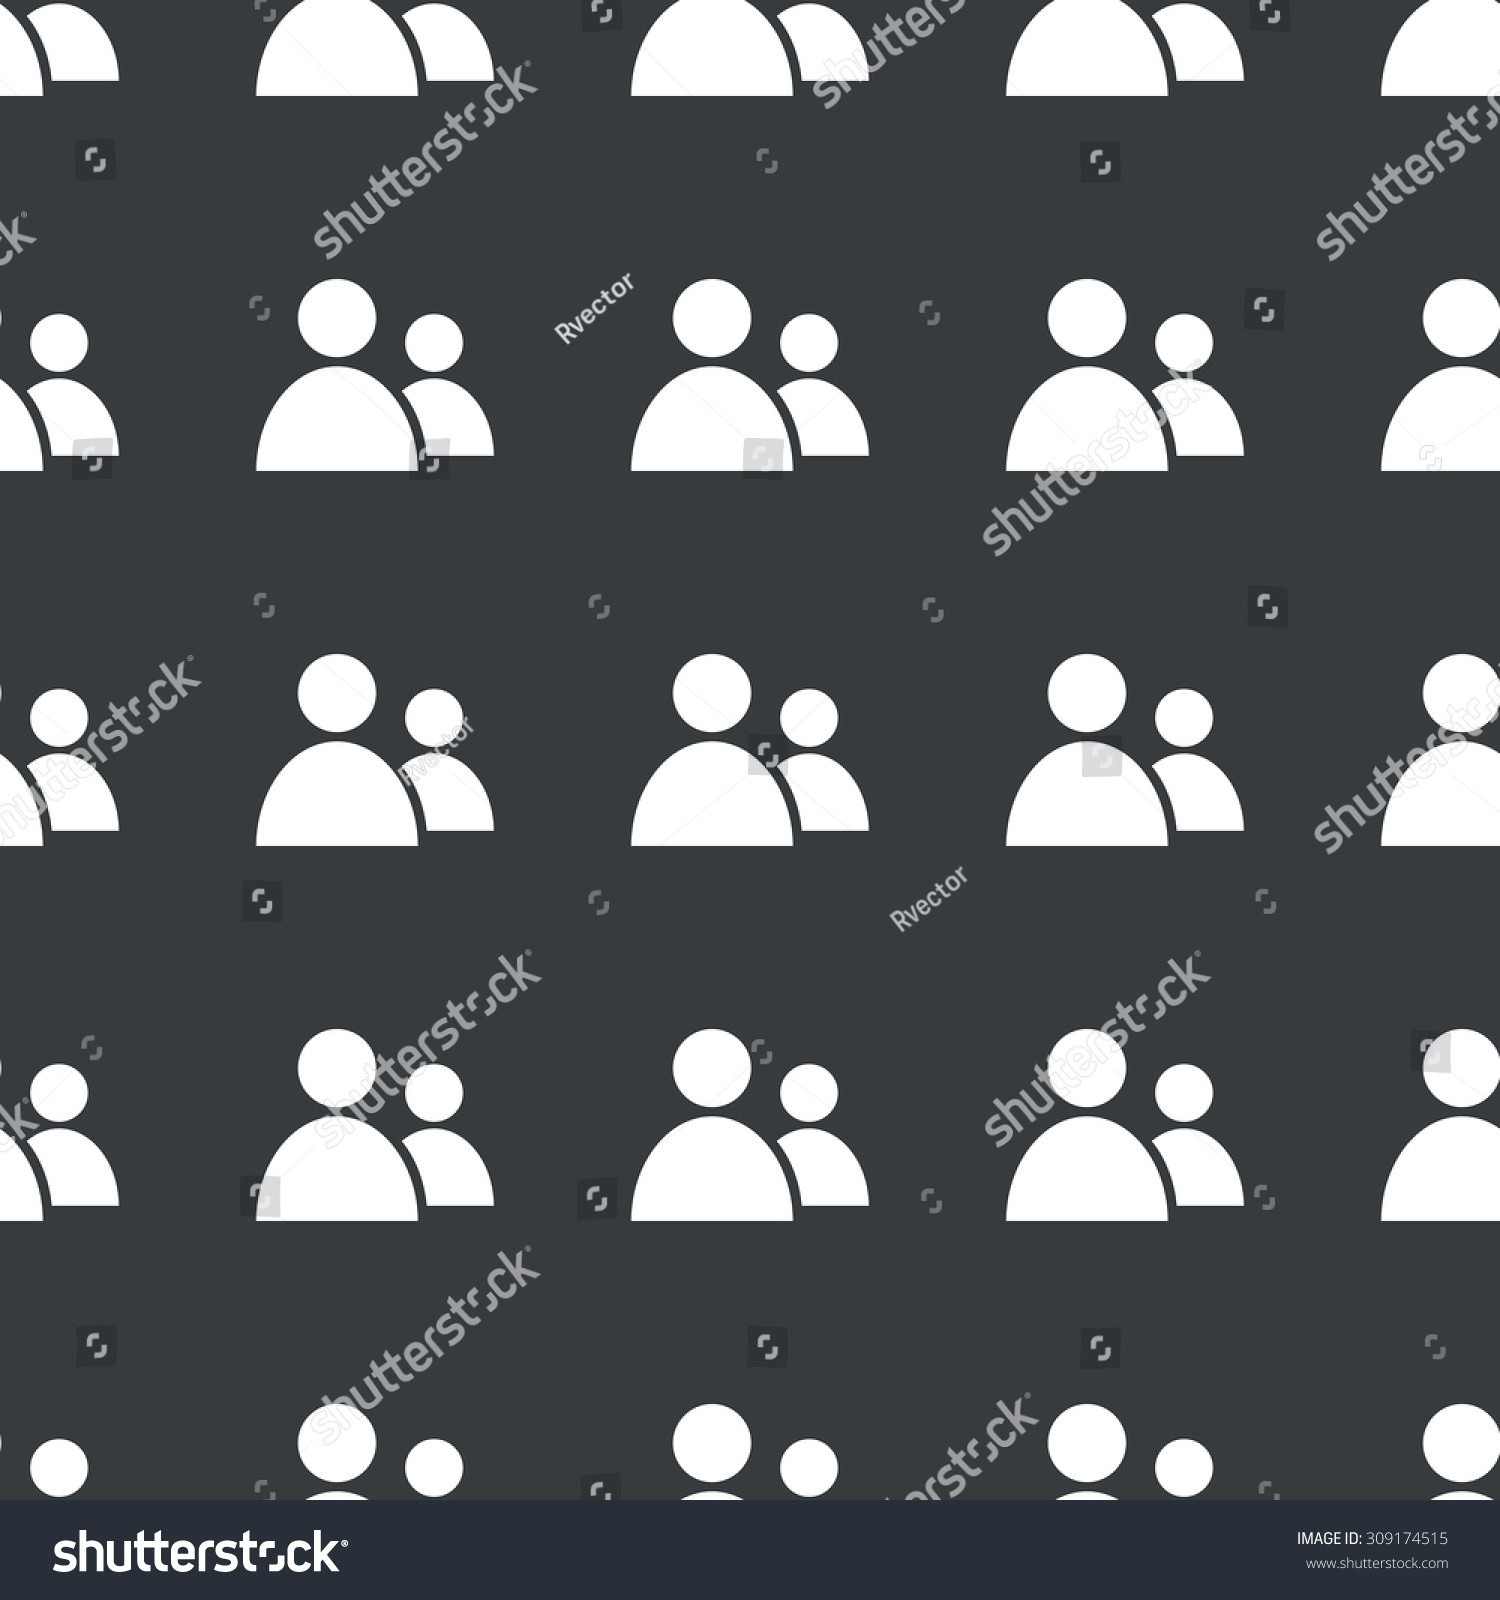 White Image Of Two User Icons Repeated On Black Background Stock Photo ...